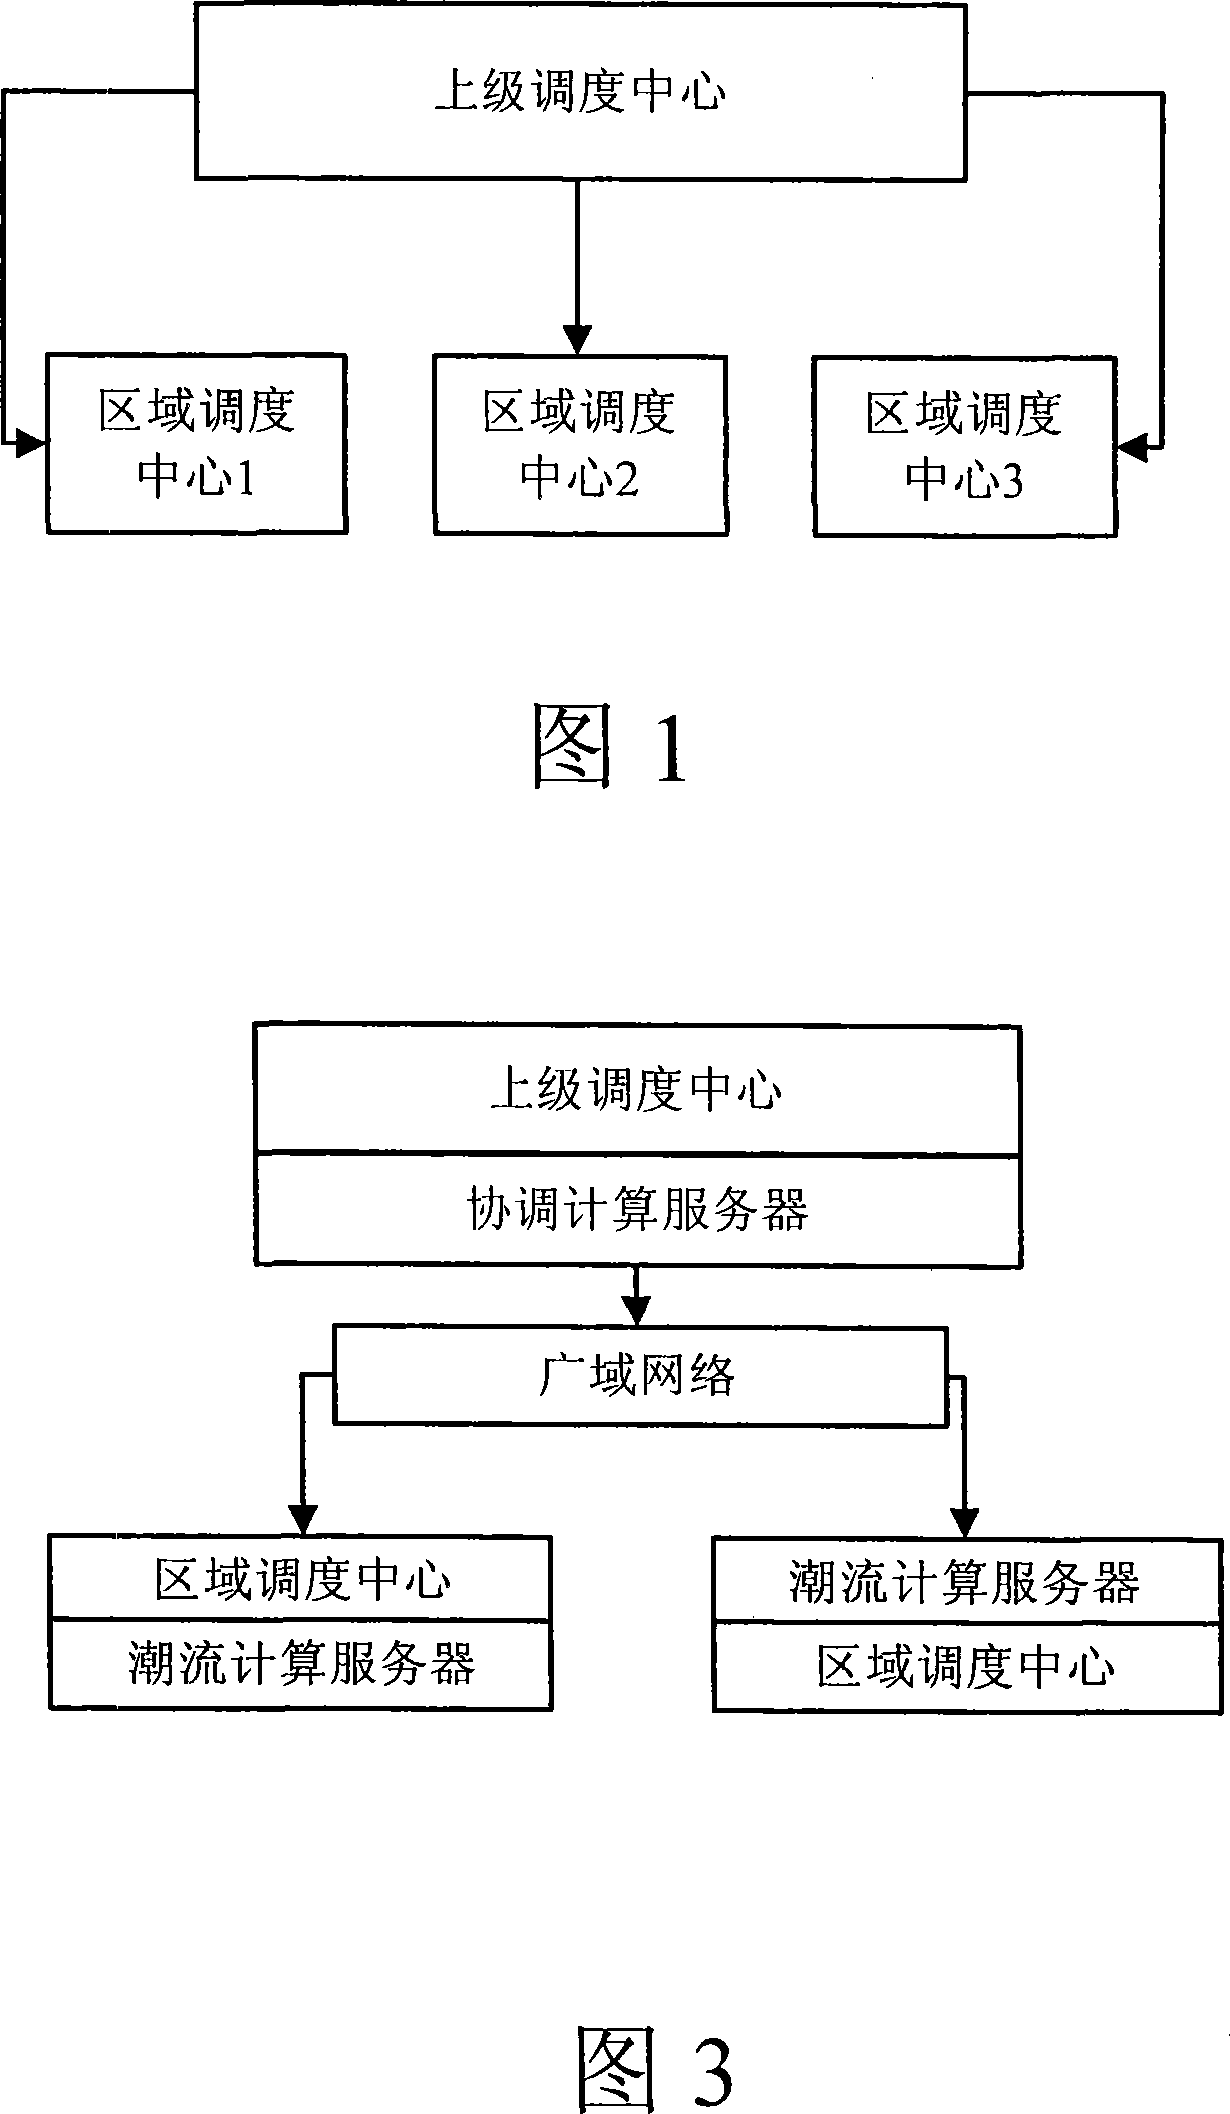 Method for distributed tidal current analyzing by exchange boundary node state and net damage information